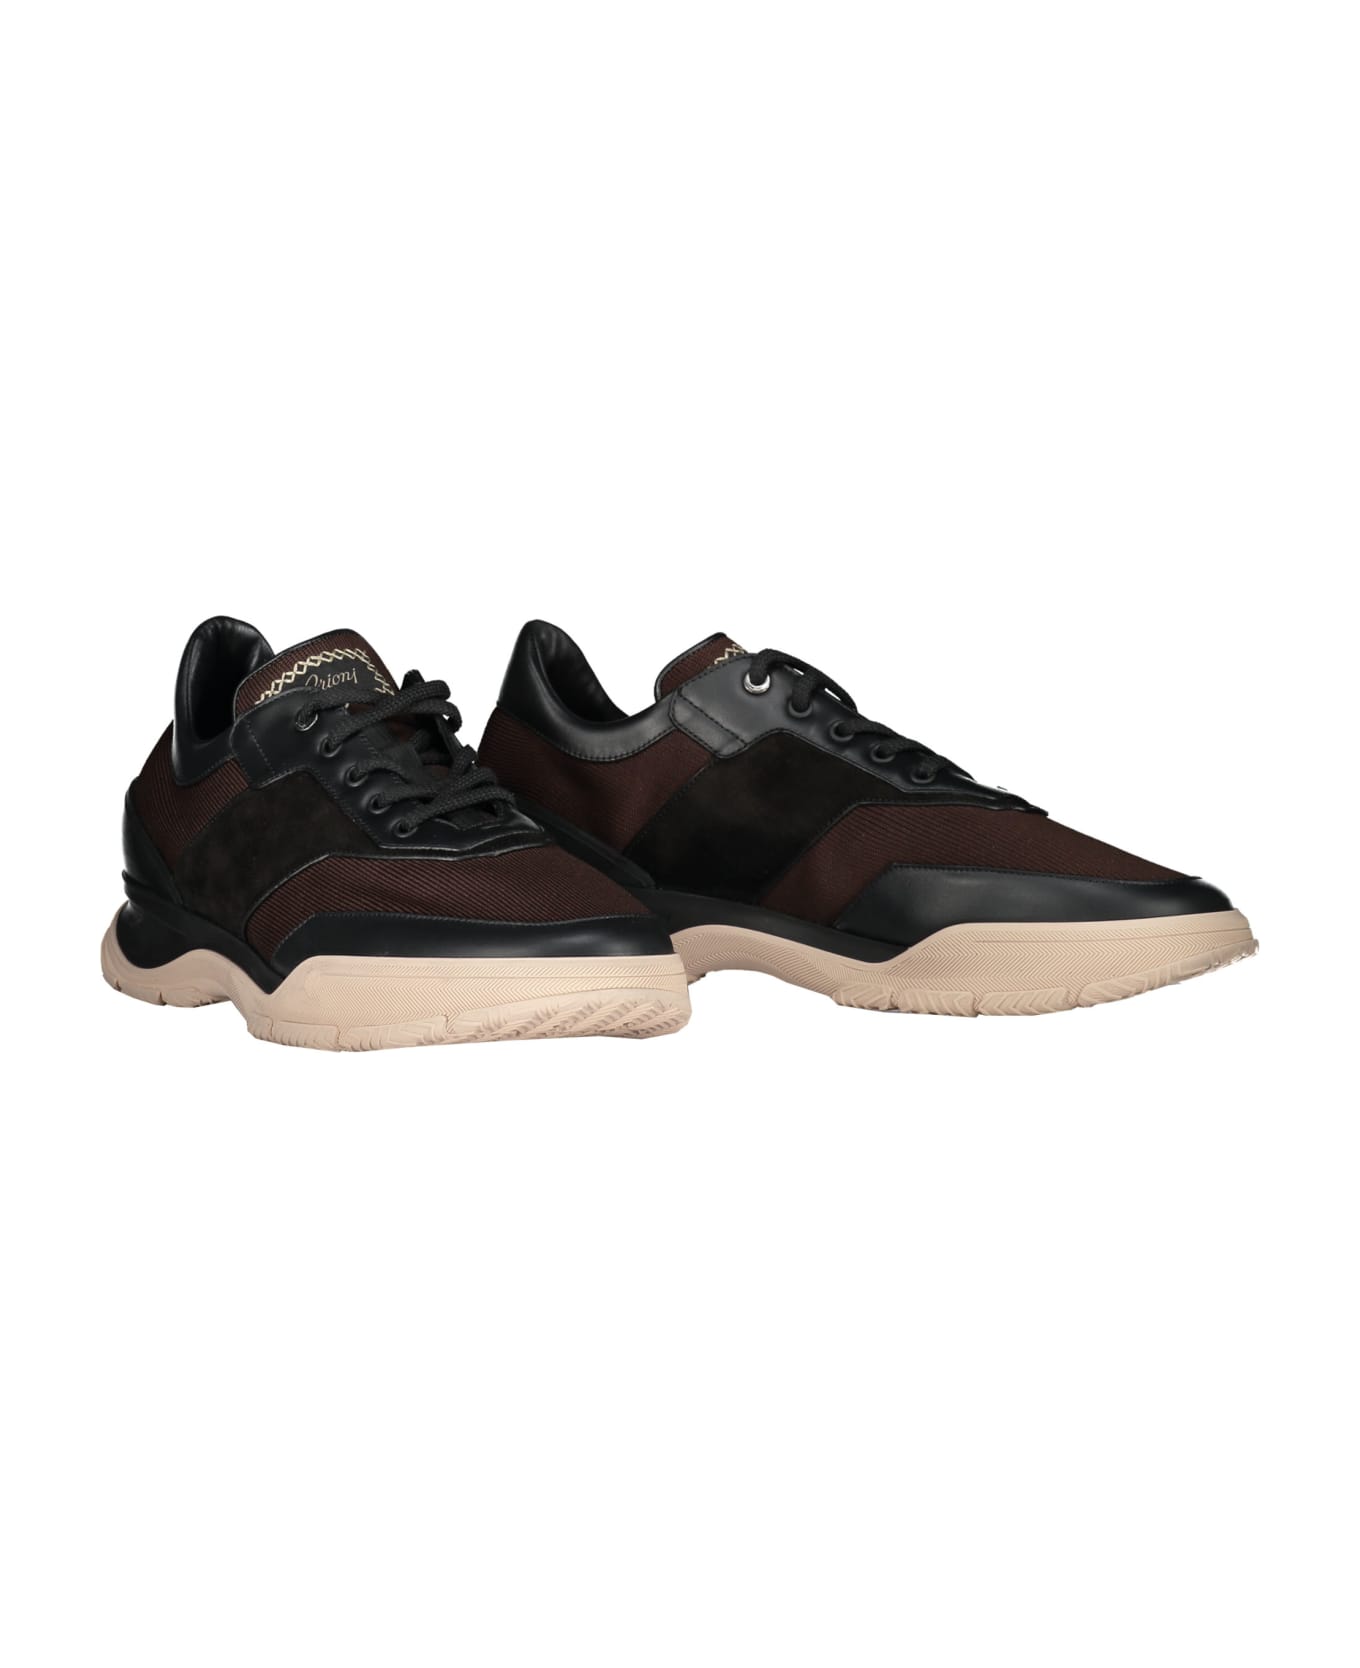 Brioni Leather Sneakers - brown スニーカー